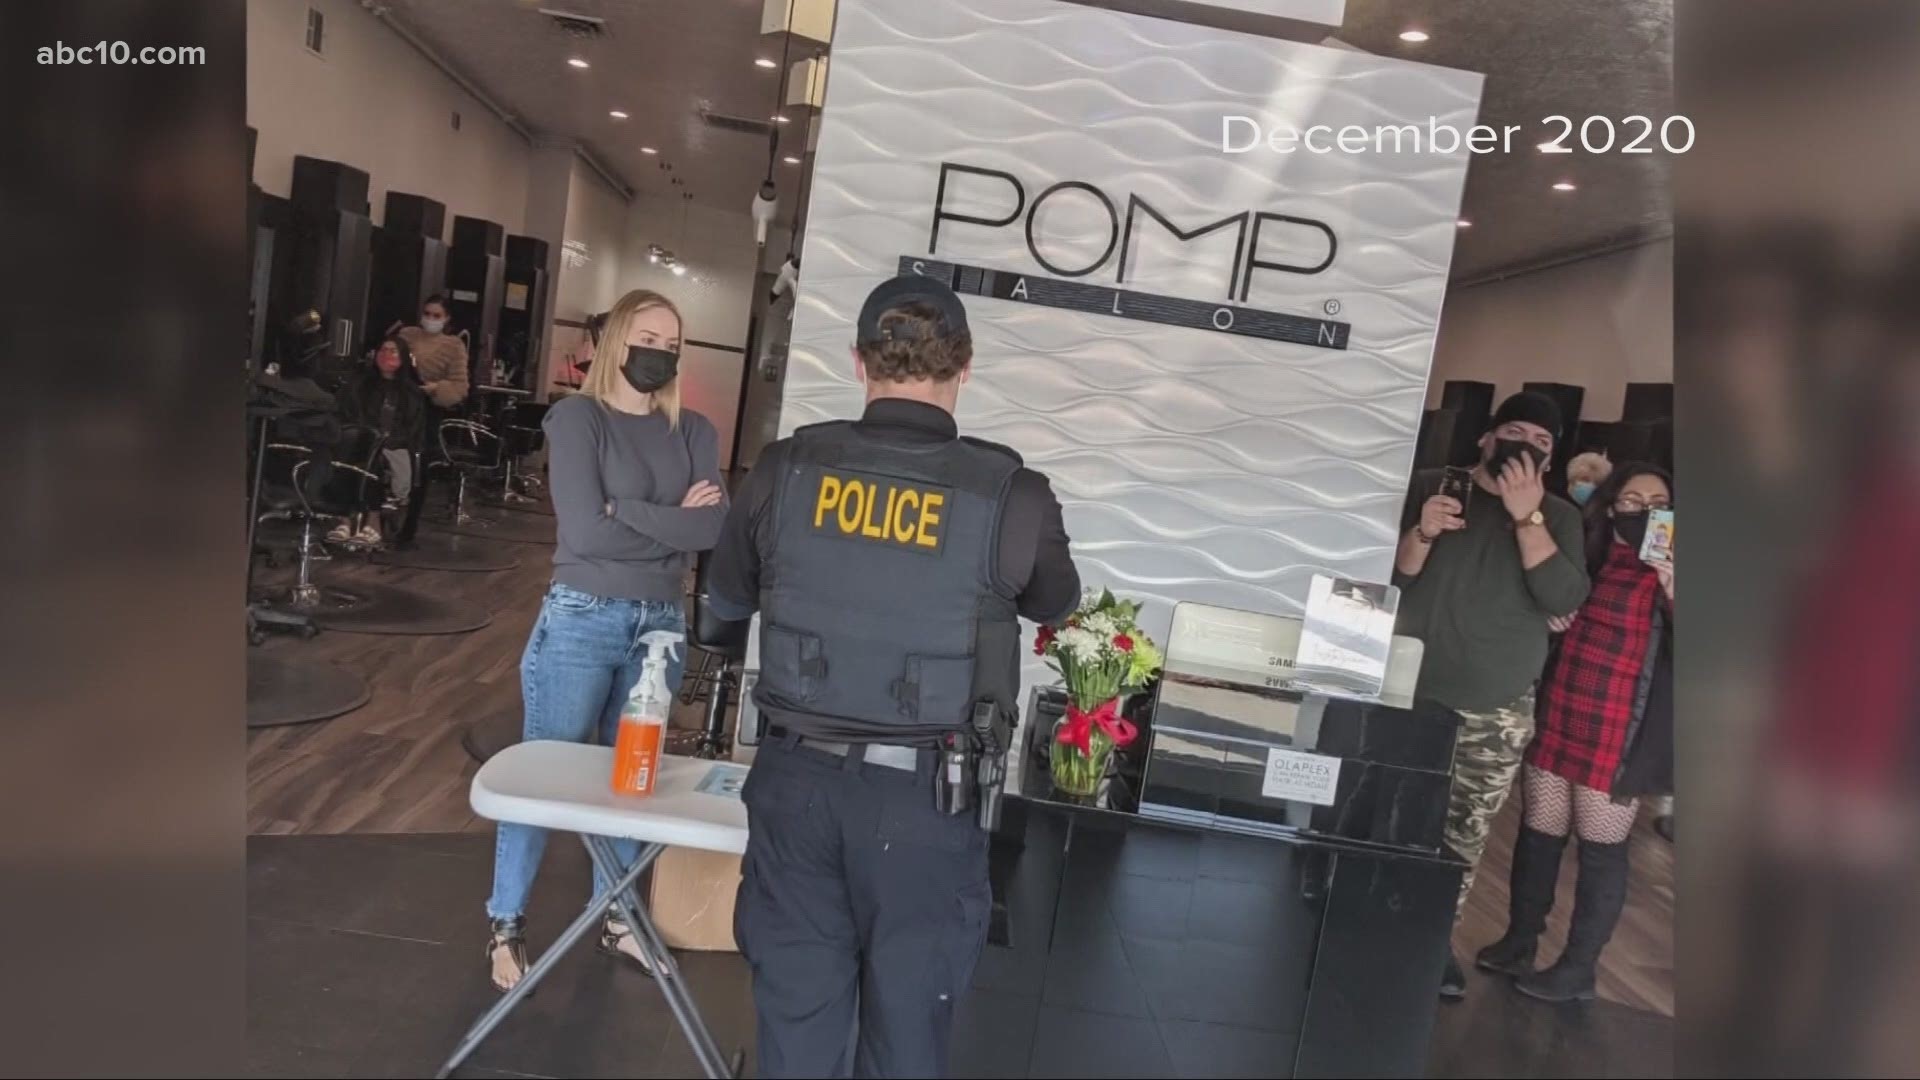 Businesses like Pomp Salon in Stockton defied state orders and opened in the middle of the pandemic while San Joaquin County was hit hard by COVID-19.